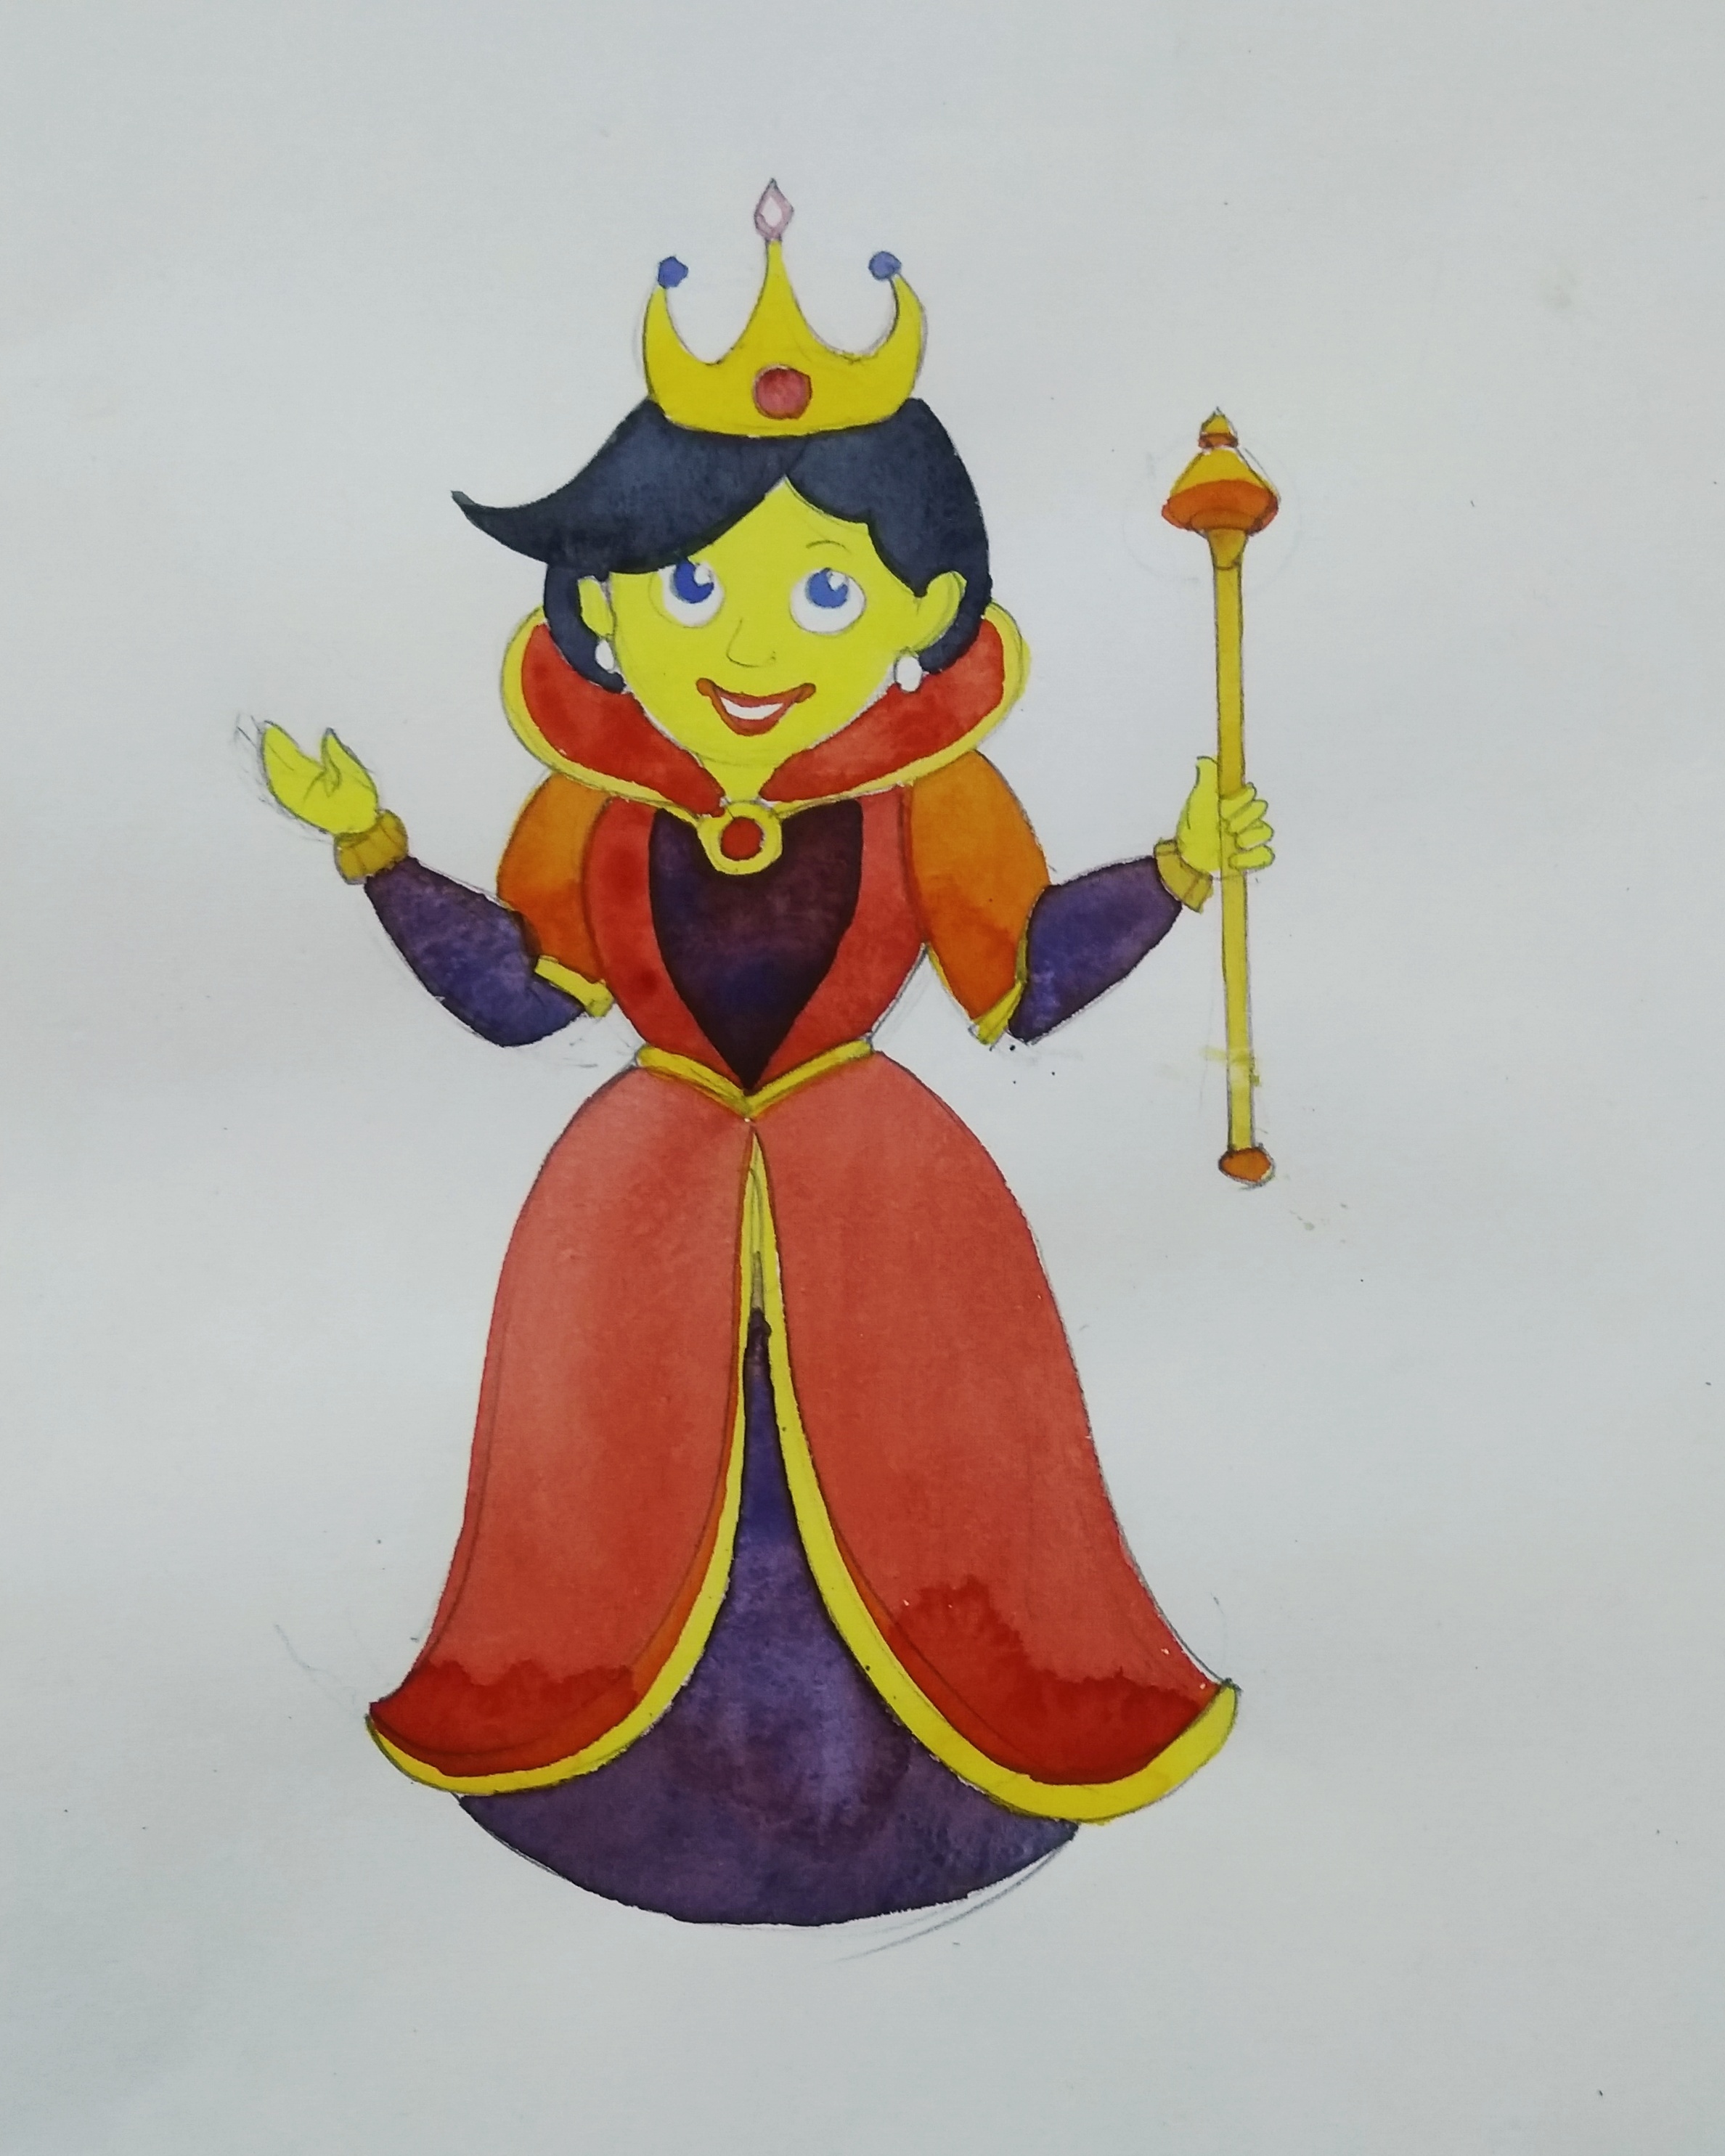 How to Draw a Cartoon Queen from the word “Queen” Easy Step by Step Drawing  Tutorial for Kids | How to Draw Step by Step Drawing Tutorials